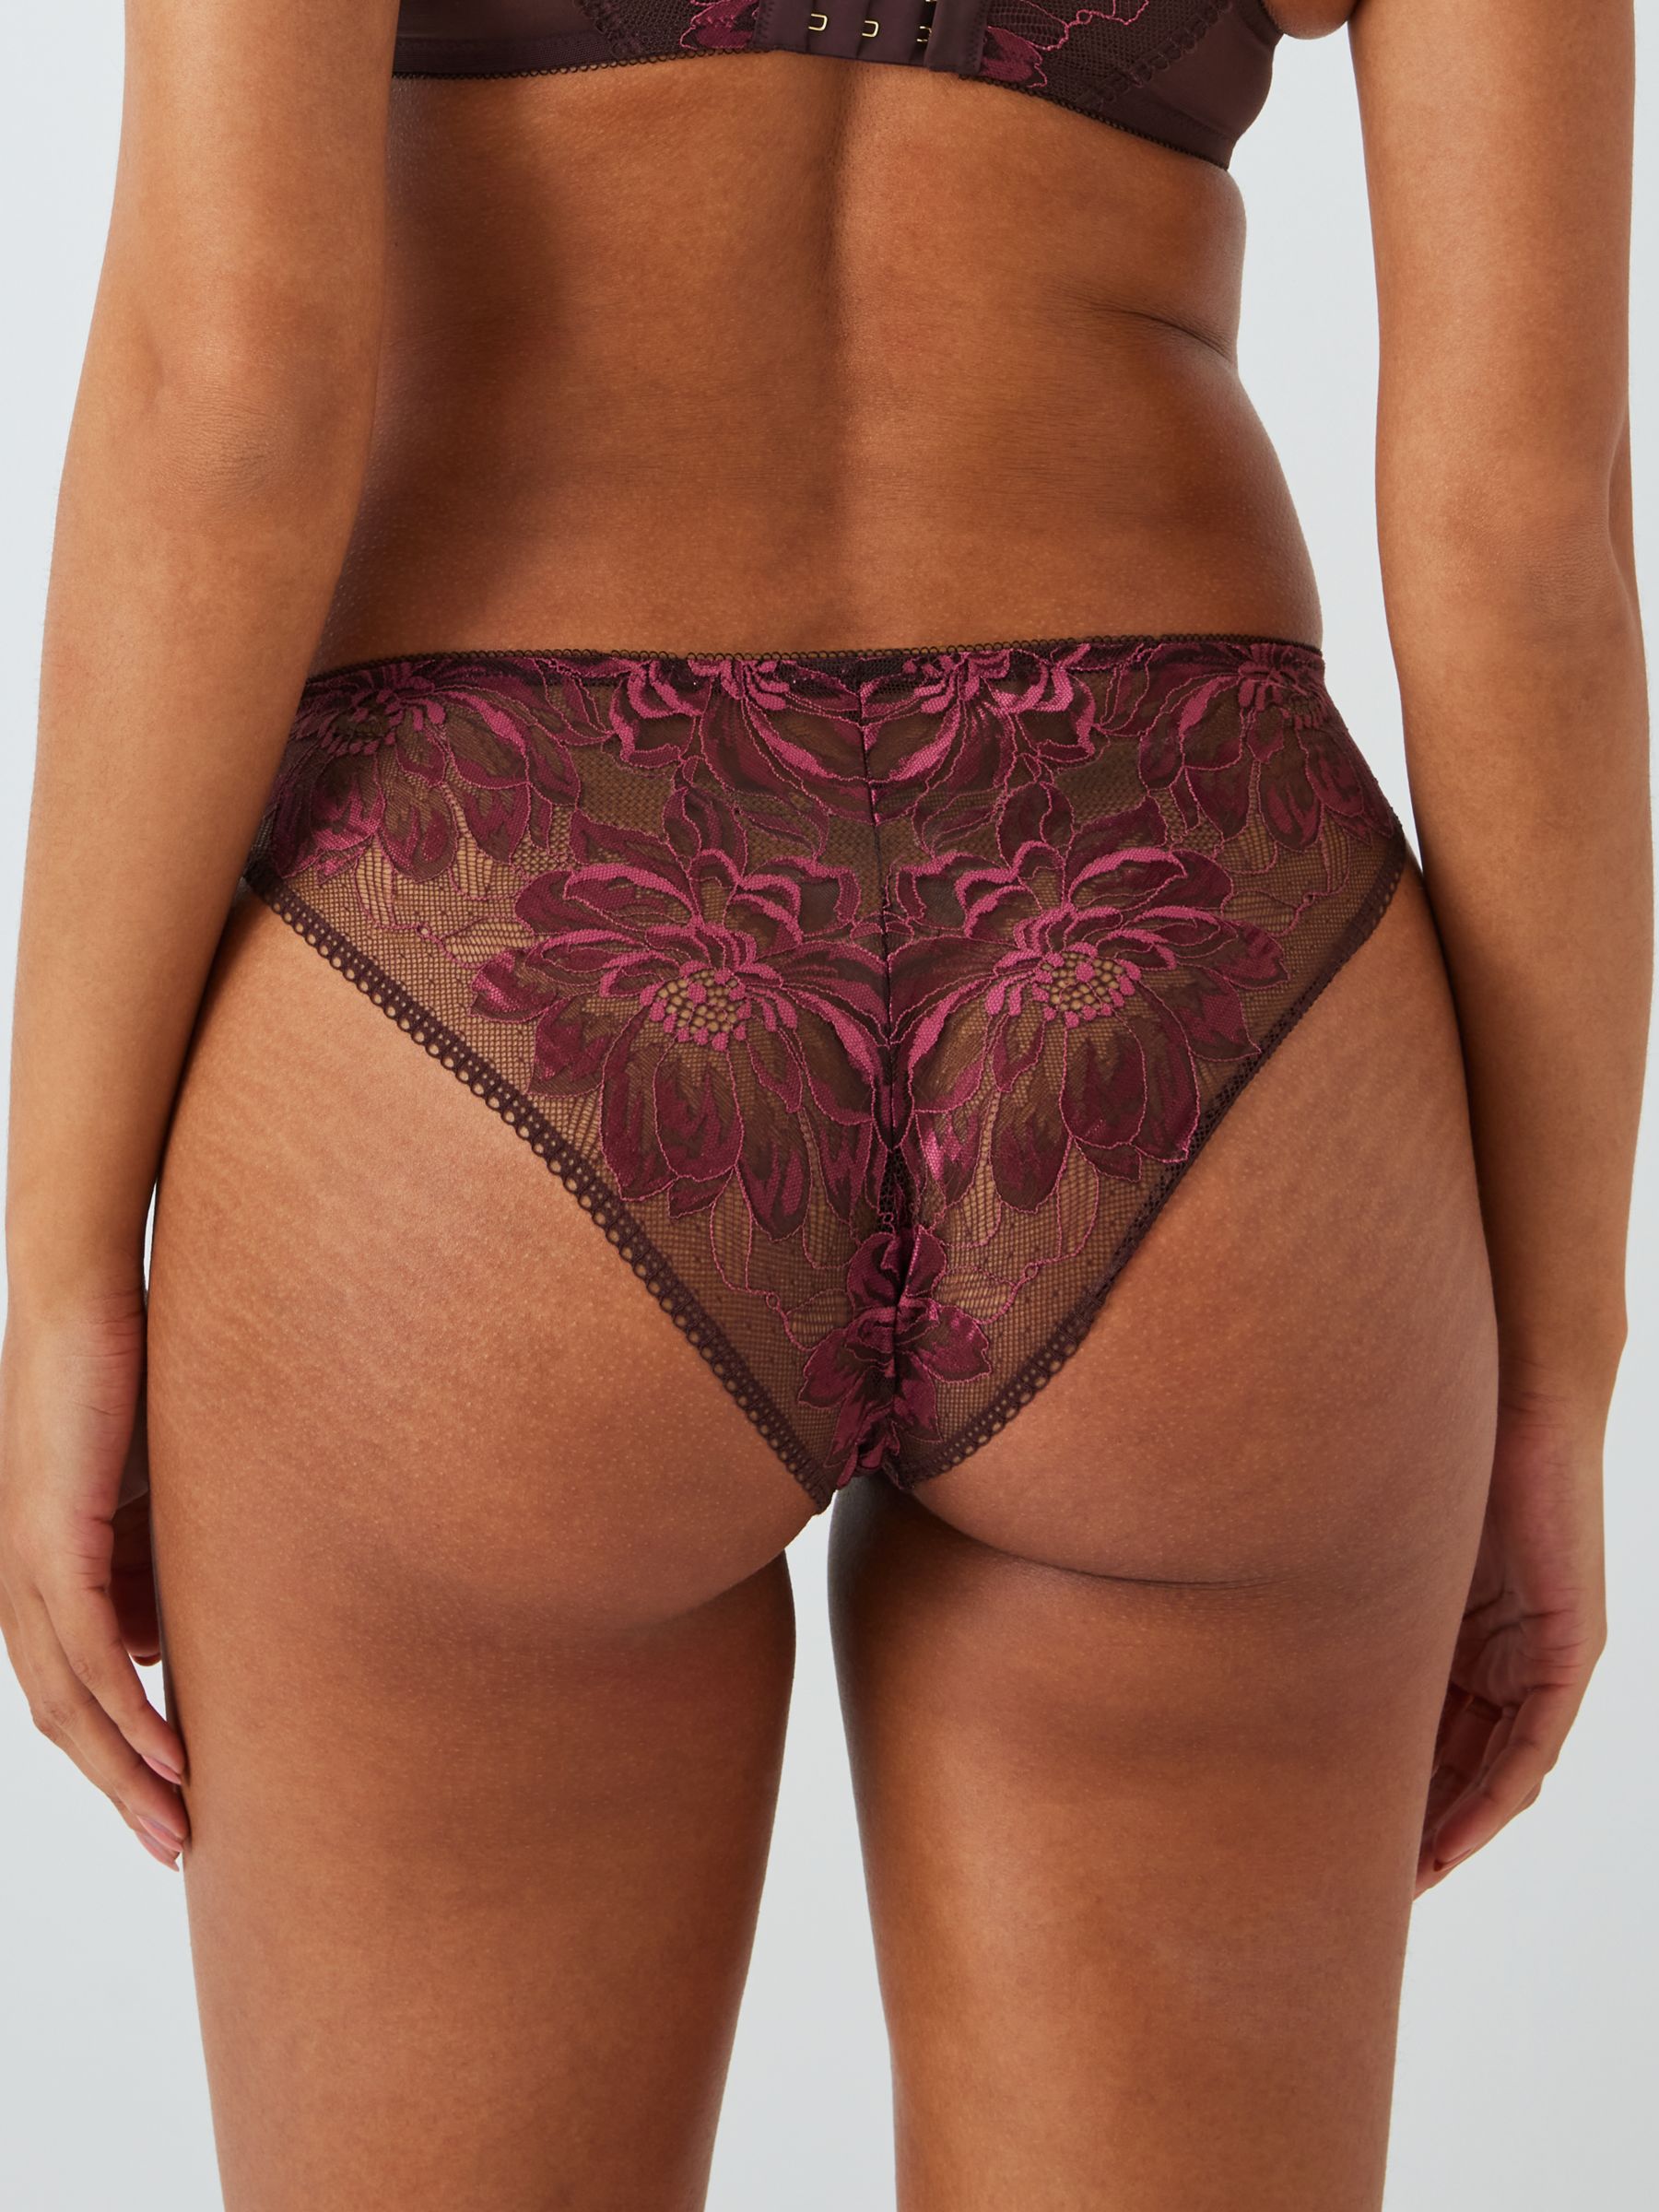 AND/OR Cindy Lace Briefs, Plum, 12